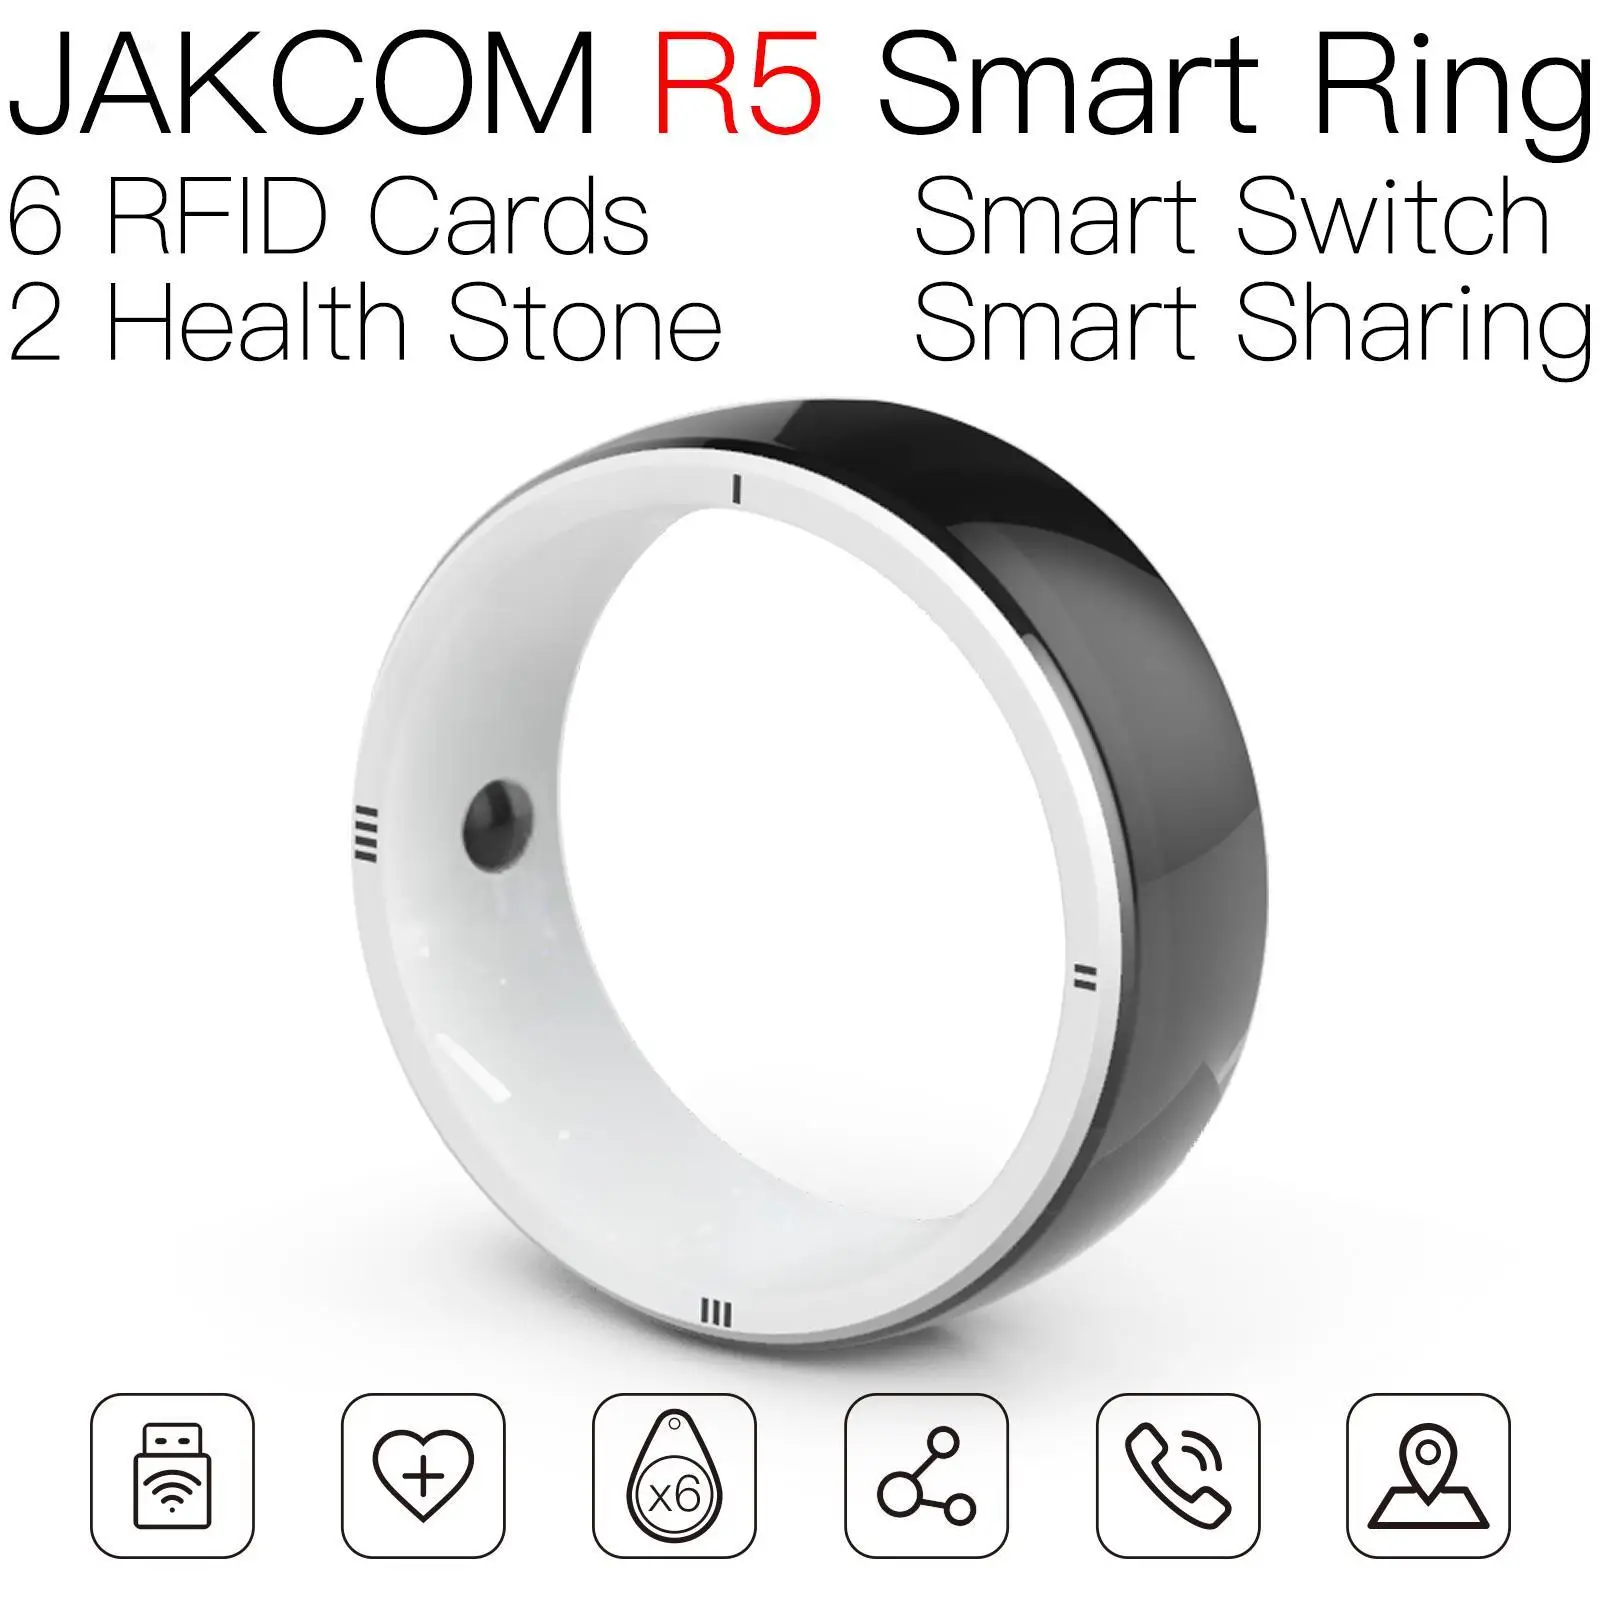 

JAKCOM R5 Smart Ring Super value as tears of the kingdom rfid 125khz rewritable pulsera nfc stickers ntag 215 stikers pay card